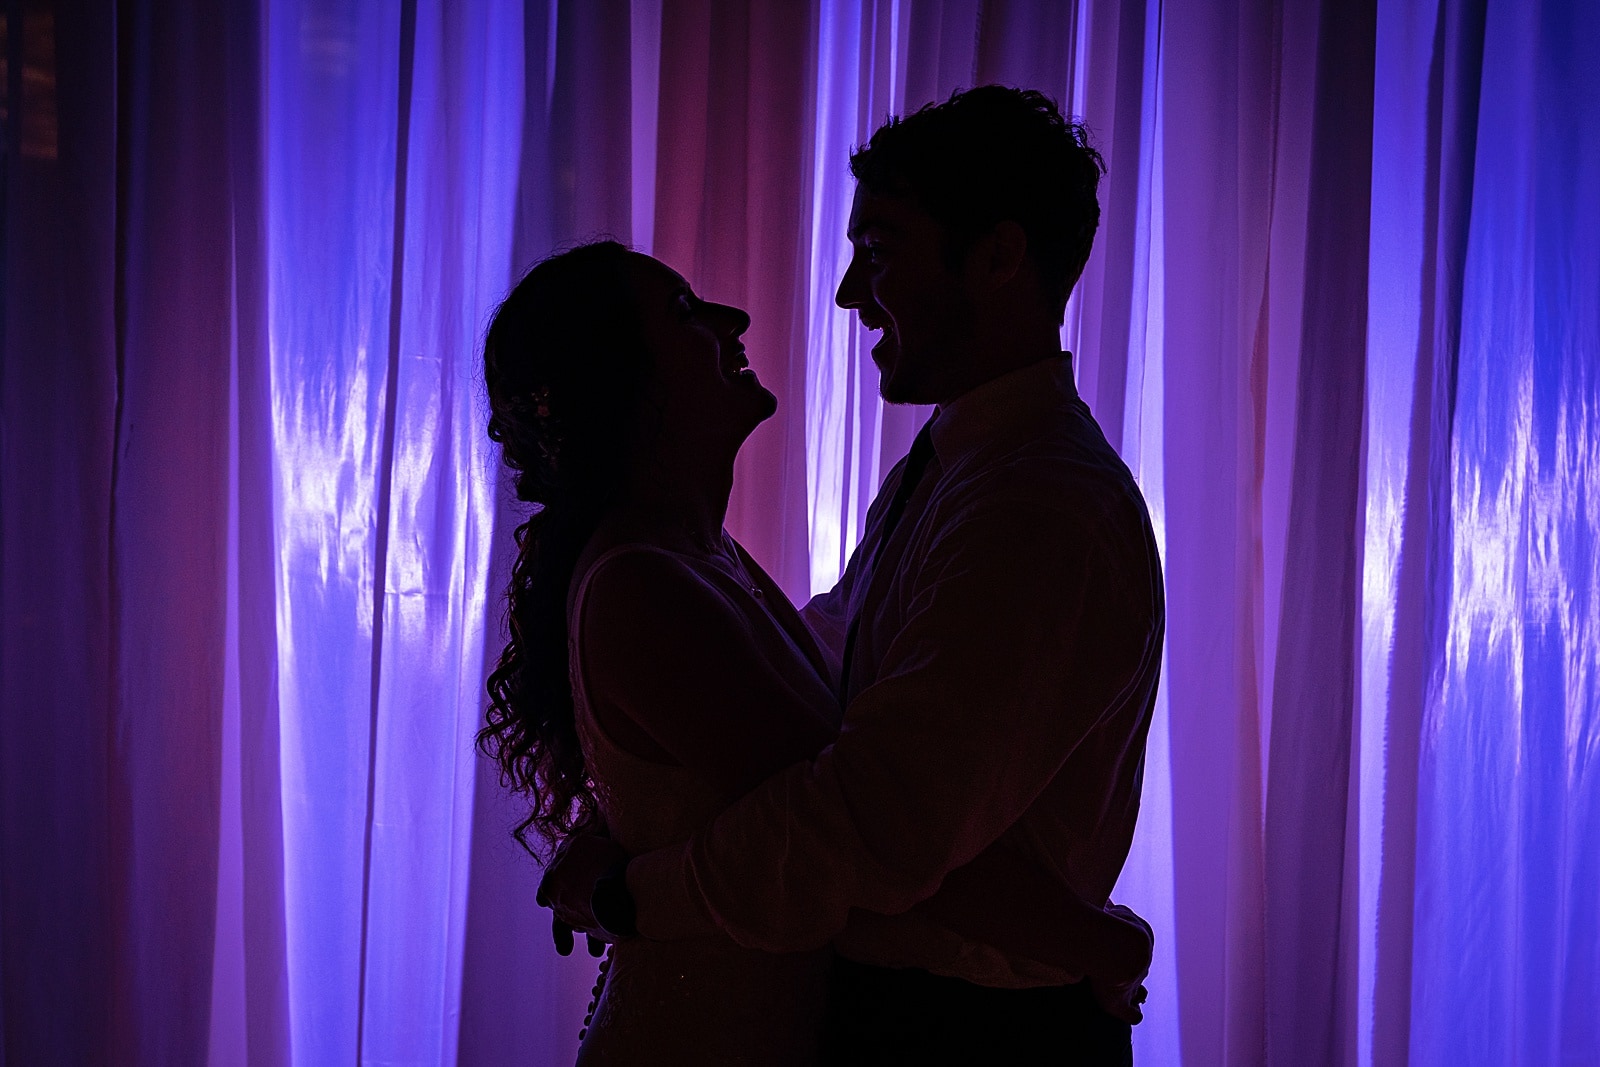 newlyweds silhouetted against a purple backdrop | colorful and creative wedding photography by Kivus & Camera